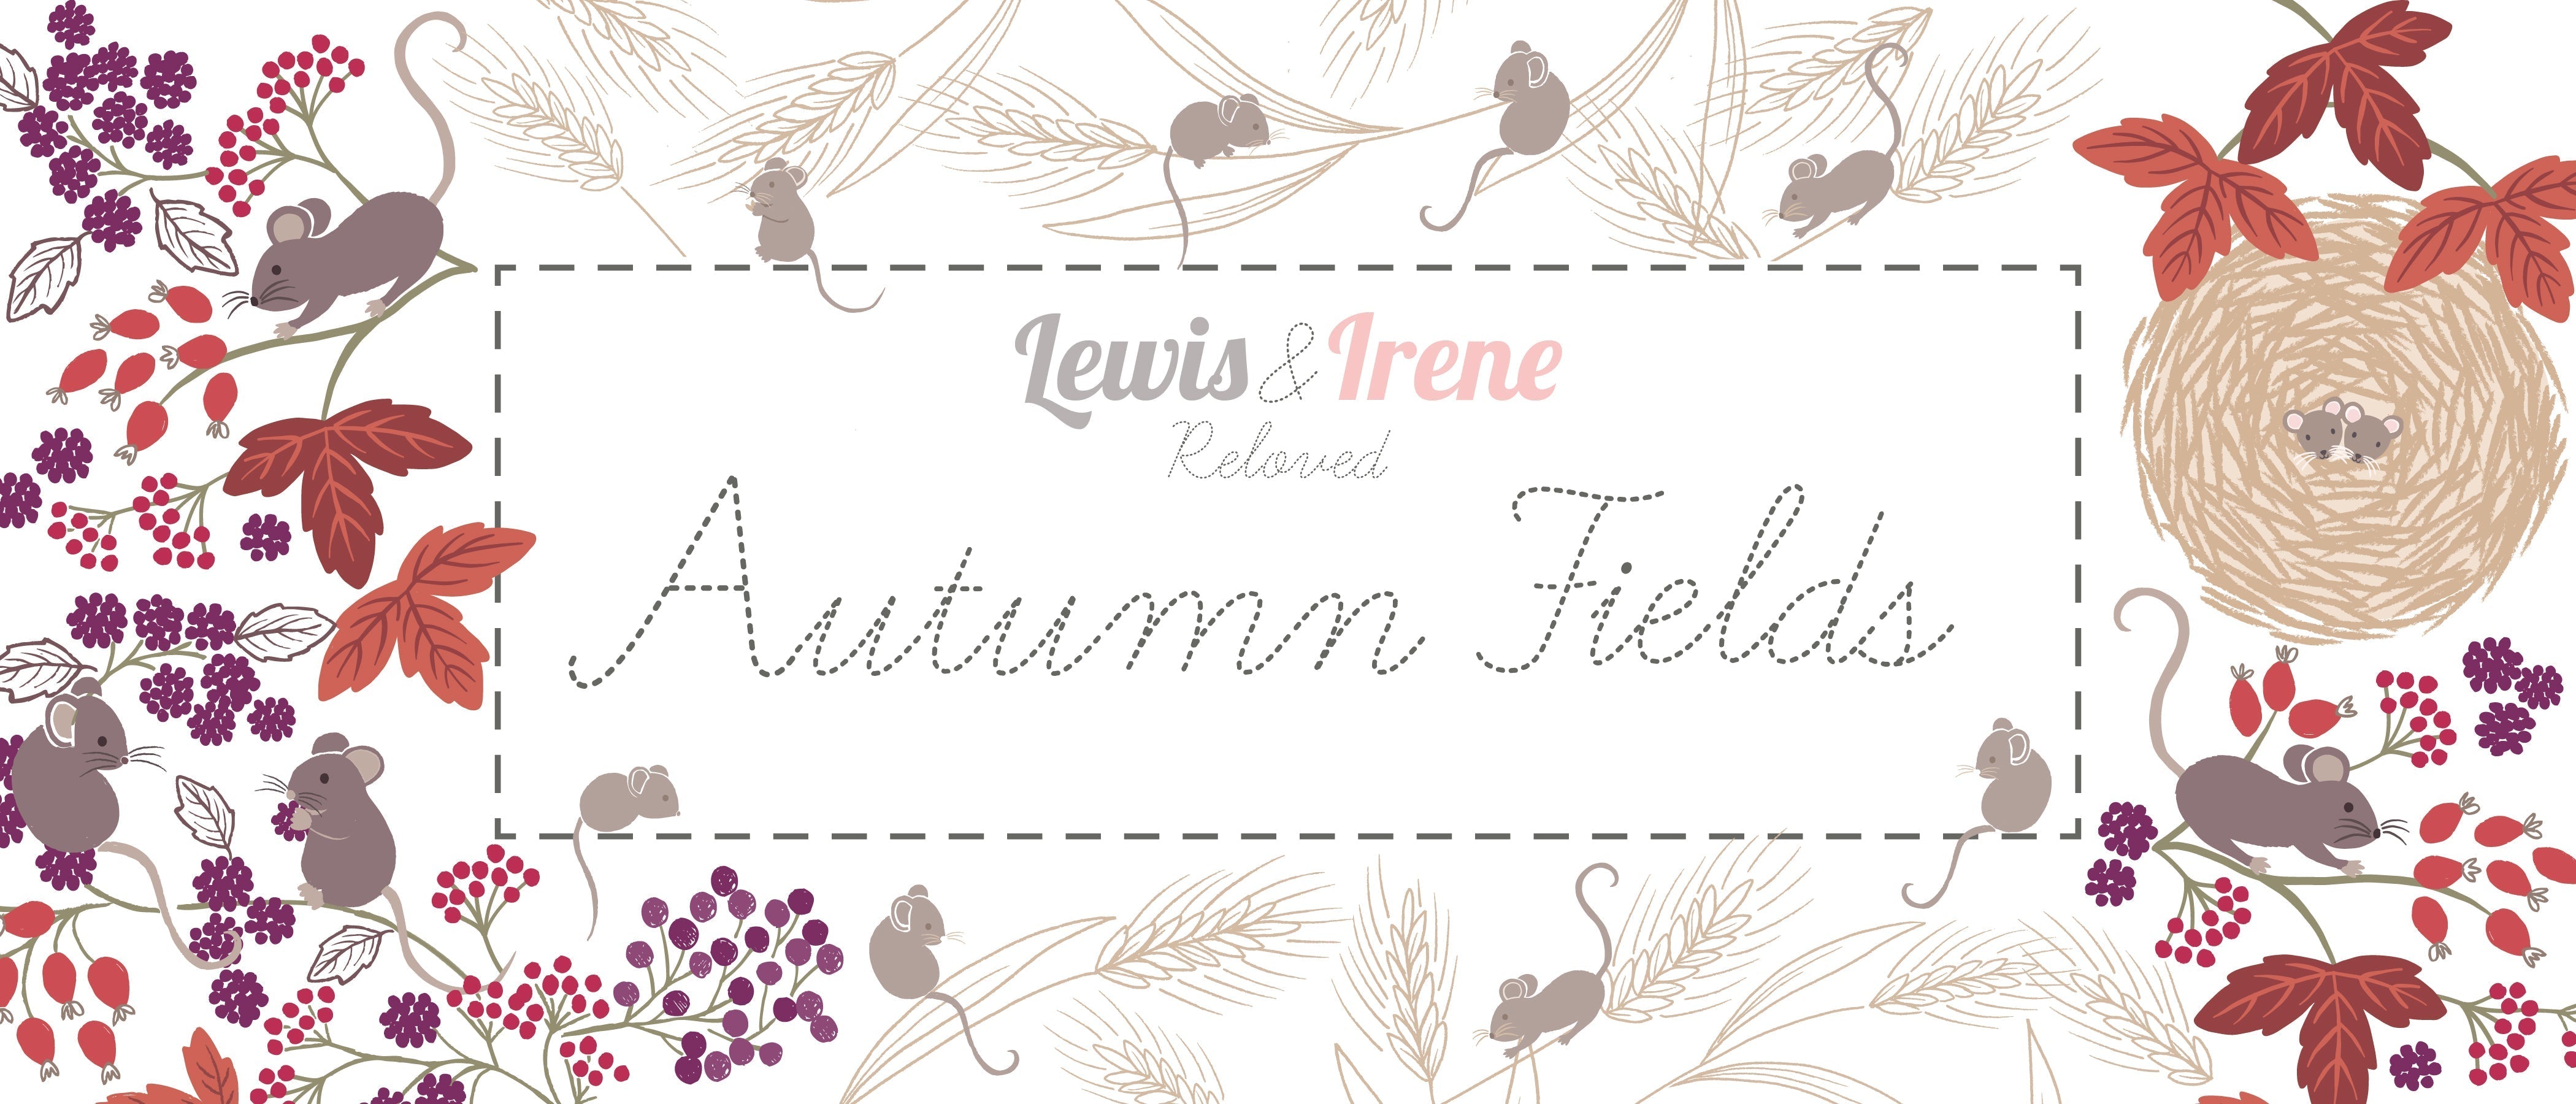 Autumn harvest nests on grey cotton fabric - Autumn Fields Re-loved by Lewis and Irene